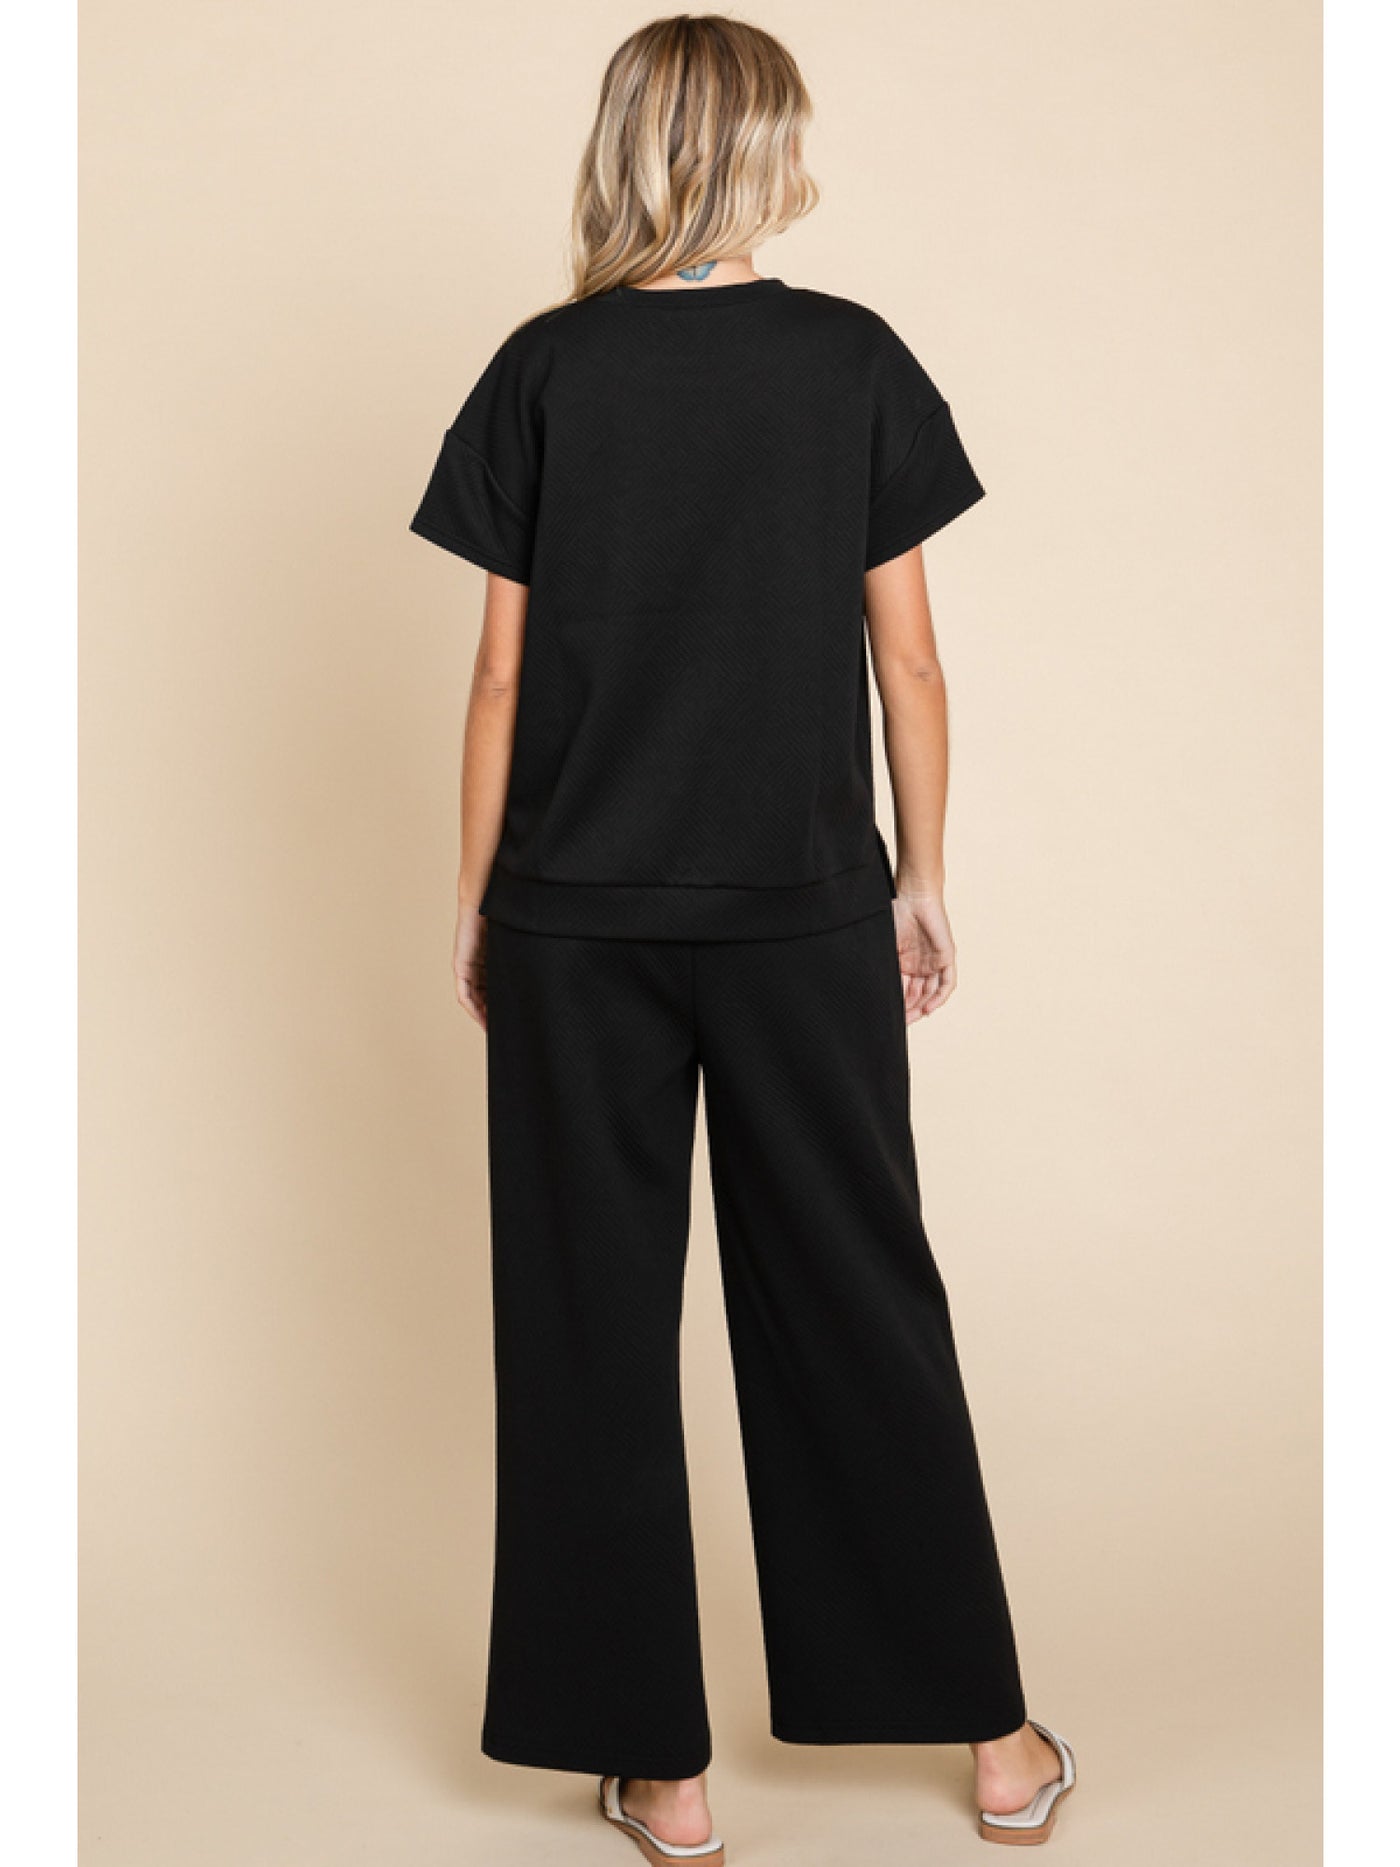 Black Textured Top w/ Breast Pocket and Pants w/ Pockets Set